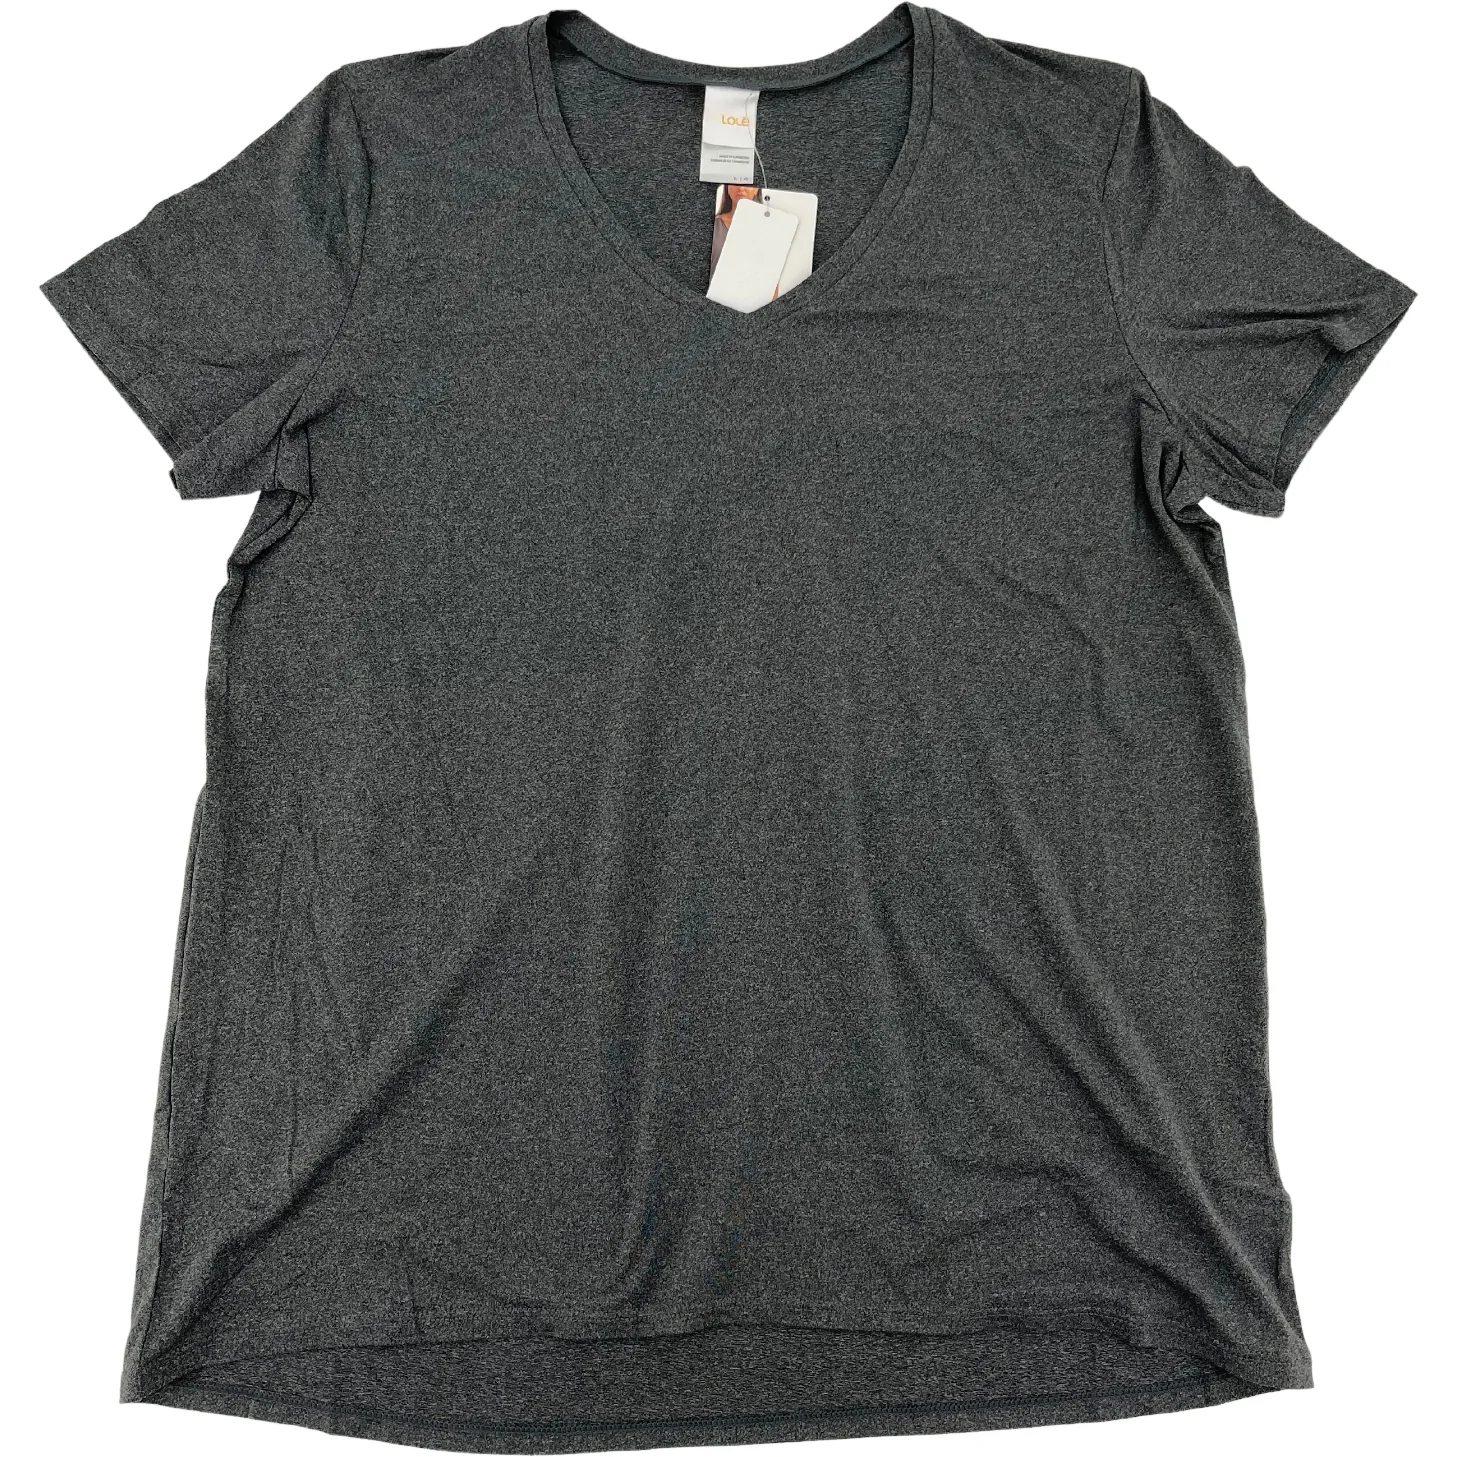 Lole Women's Grey & White T-Shirts Pack / Various Sizes